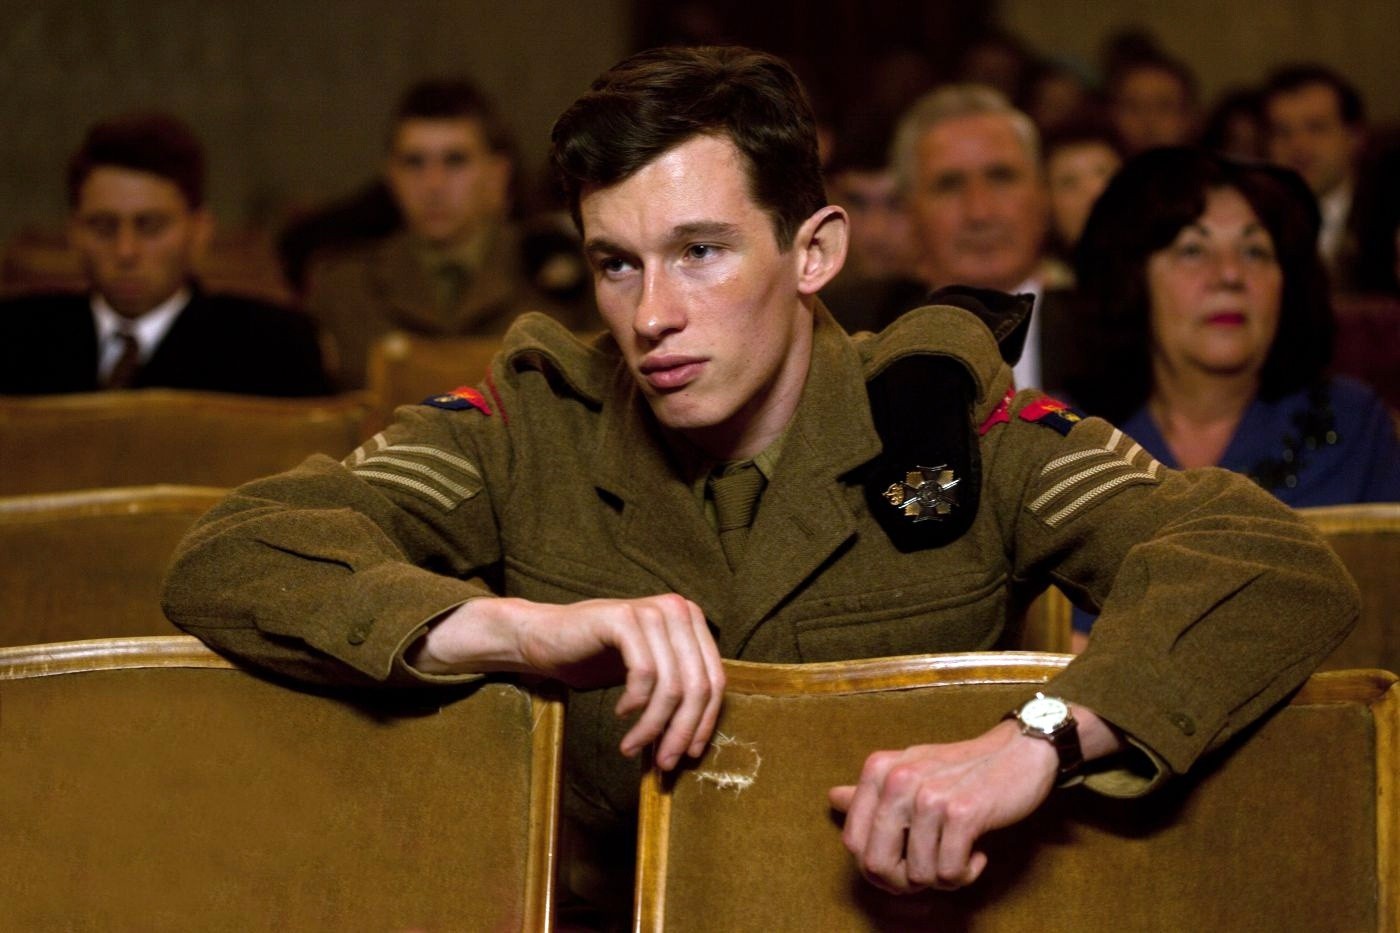 Callum Turner stars as Bill Rohan in BBC Worldwide Americas' Queen and Country (2015)